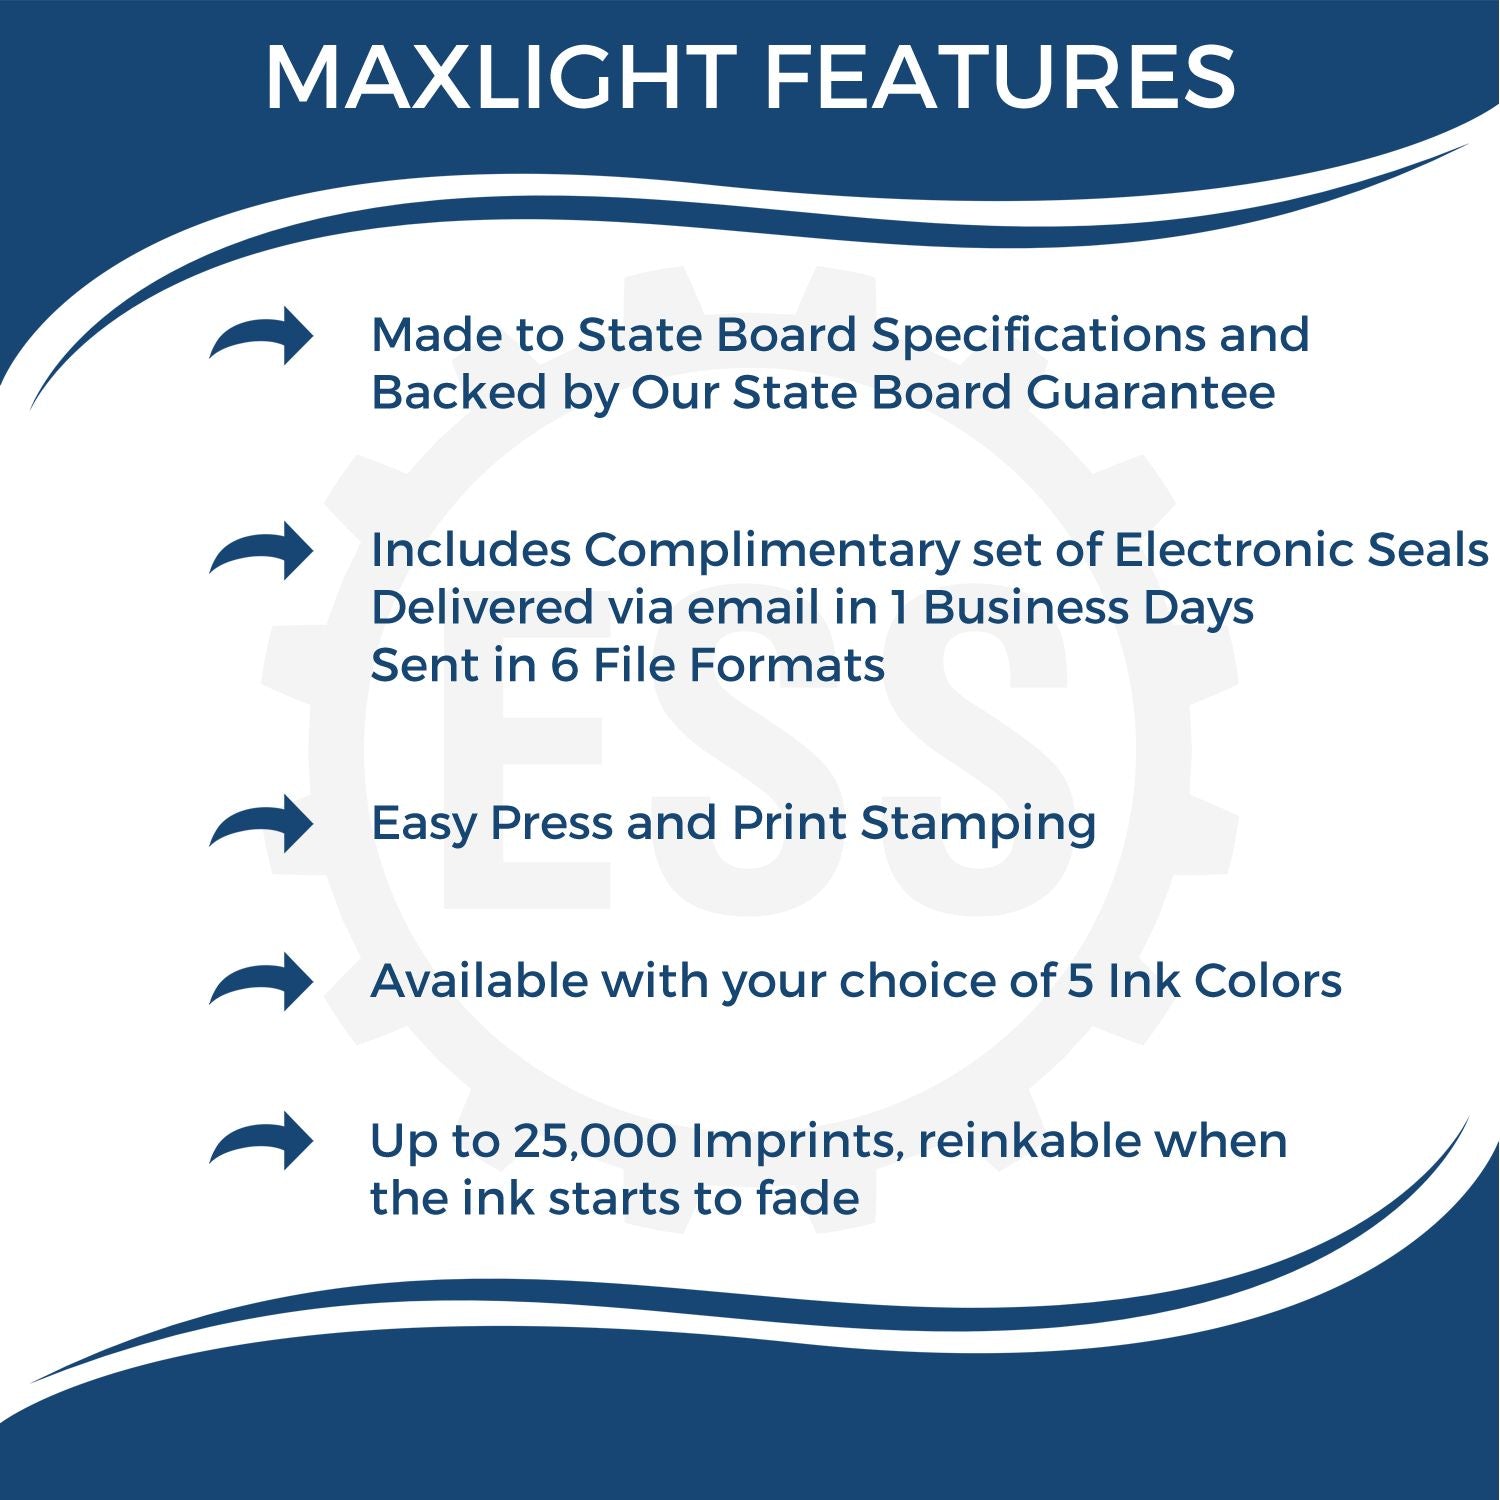 A picture of an infographic highlighting the selling points for the Premium MaxLight Pre-Inked Alabama Landscape Architectural Stamp